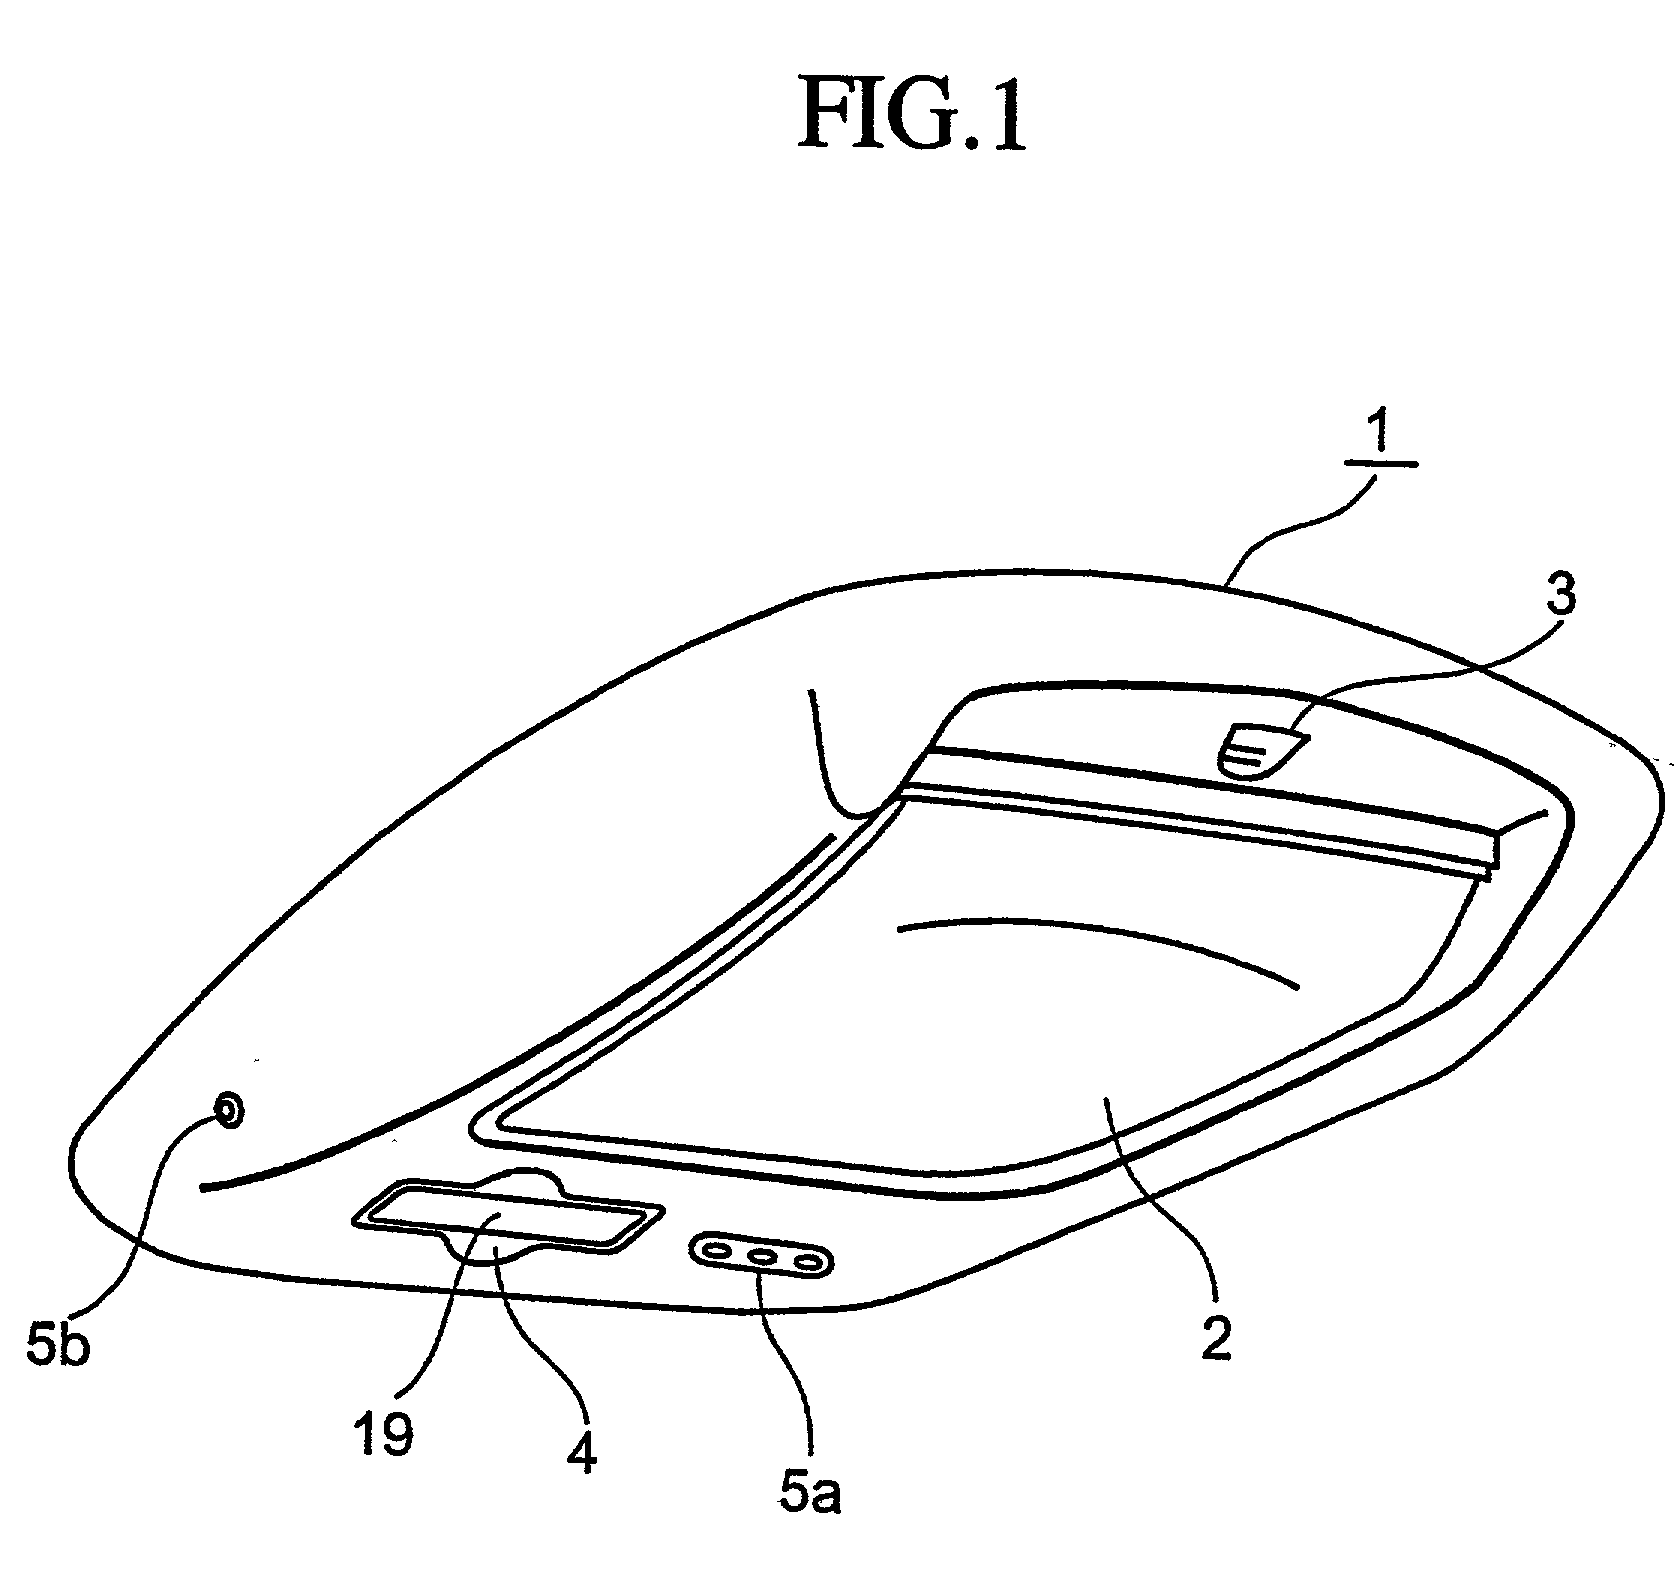 Image reproducing device